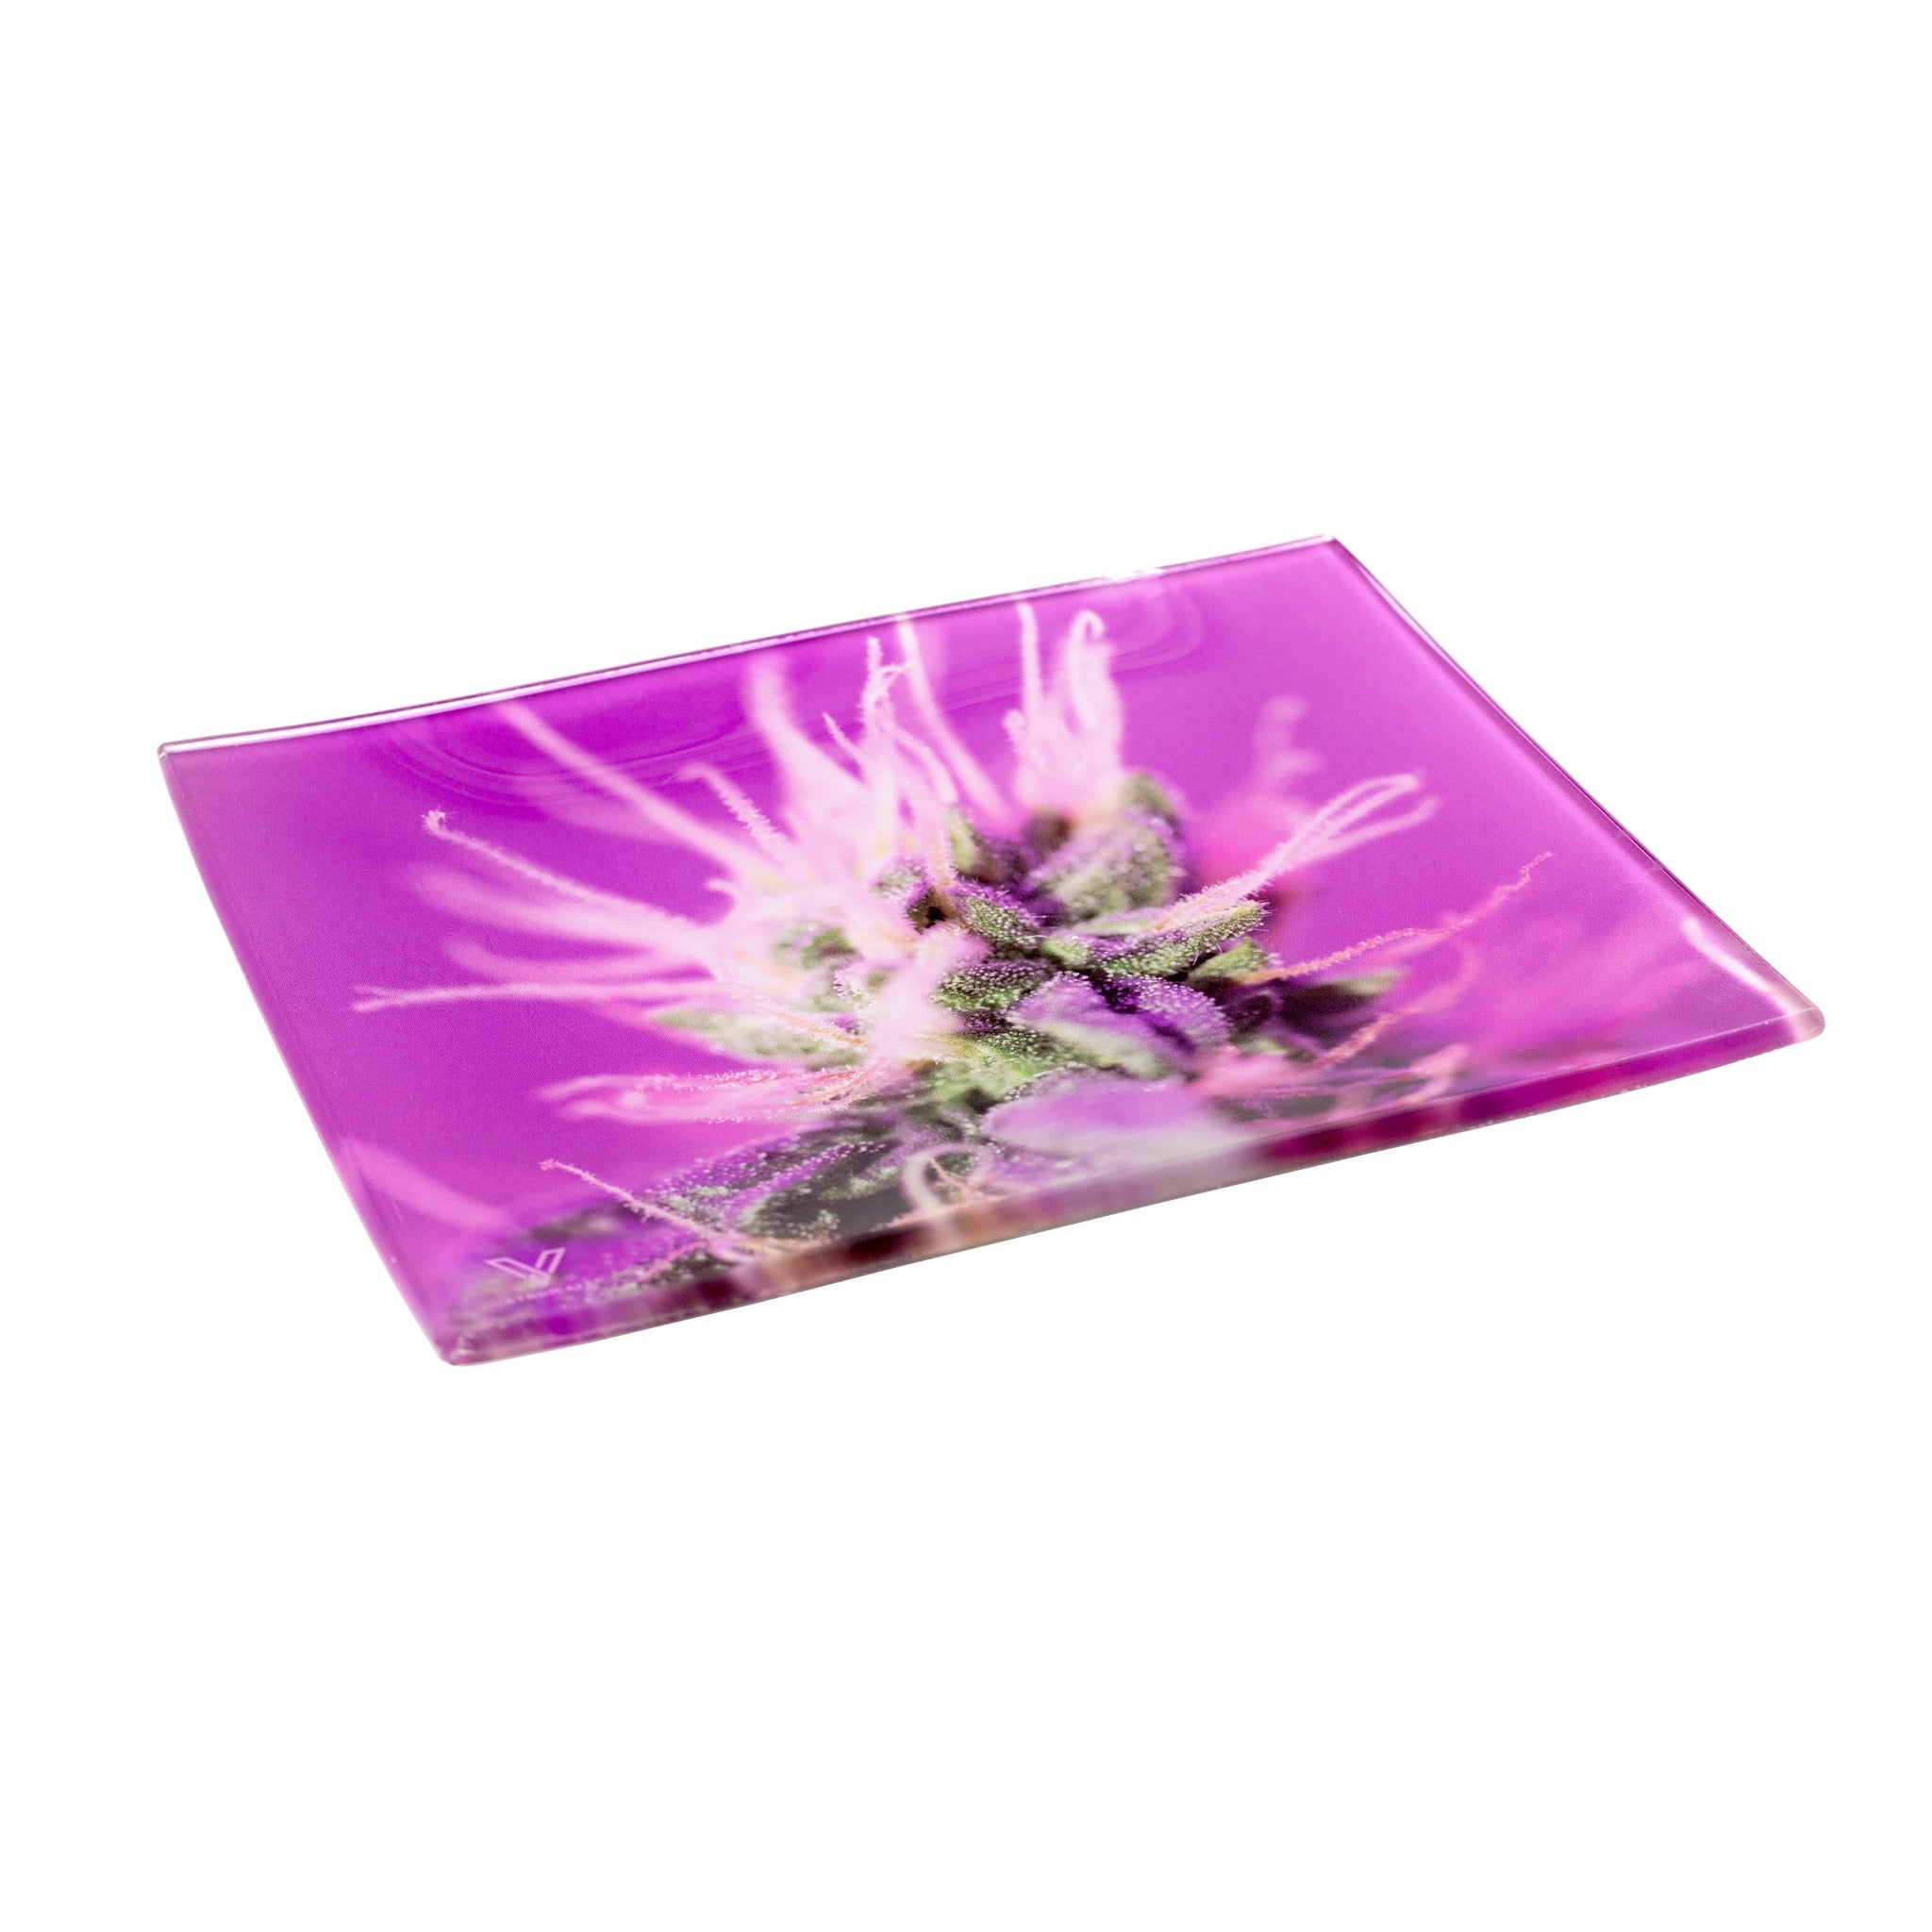 V Syndicate Pink Lemonade Glass Rolling Tray Rolling Tray VS 